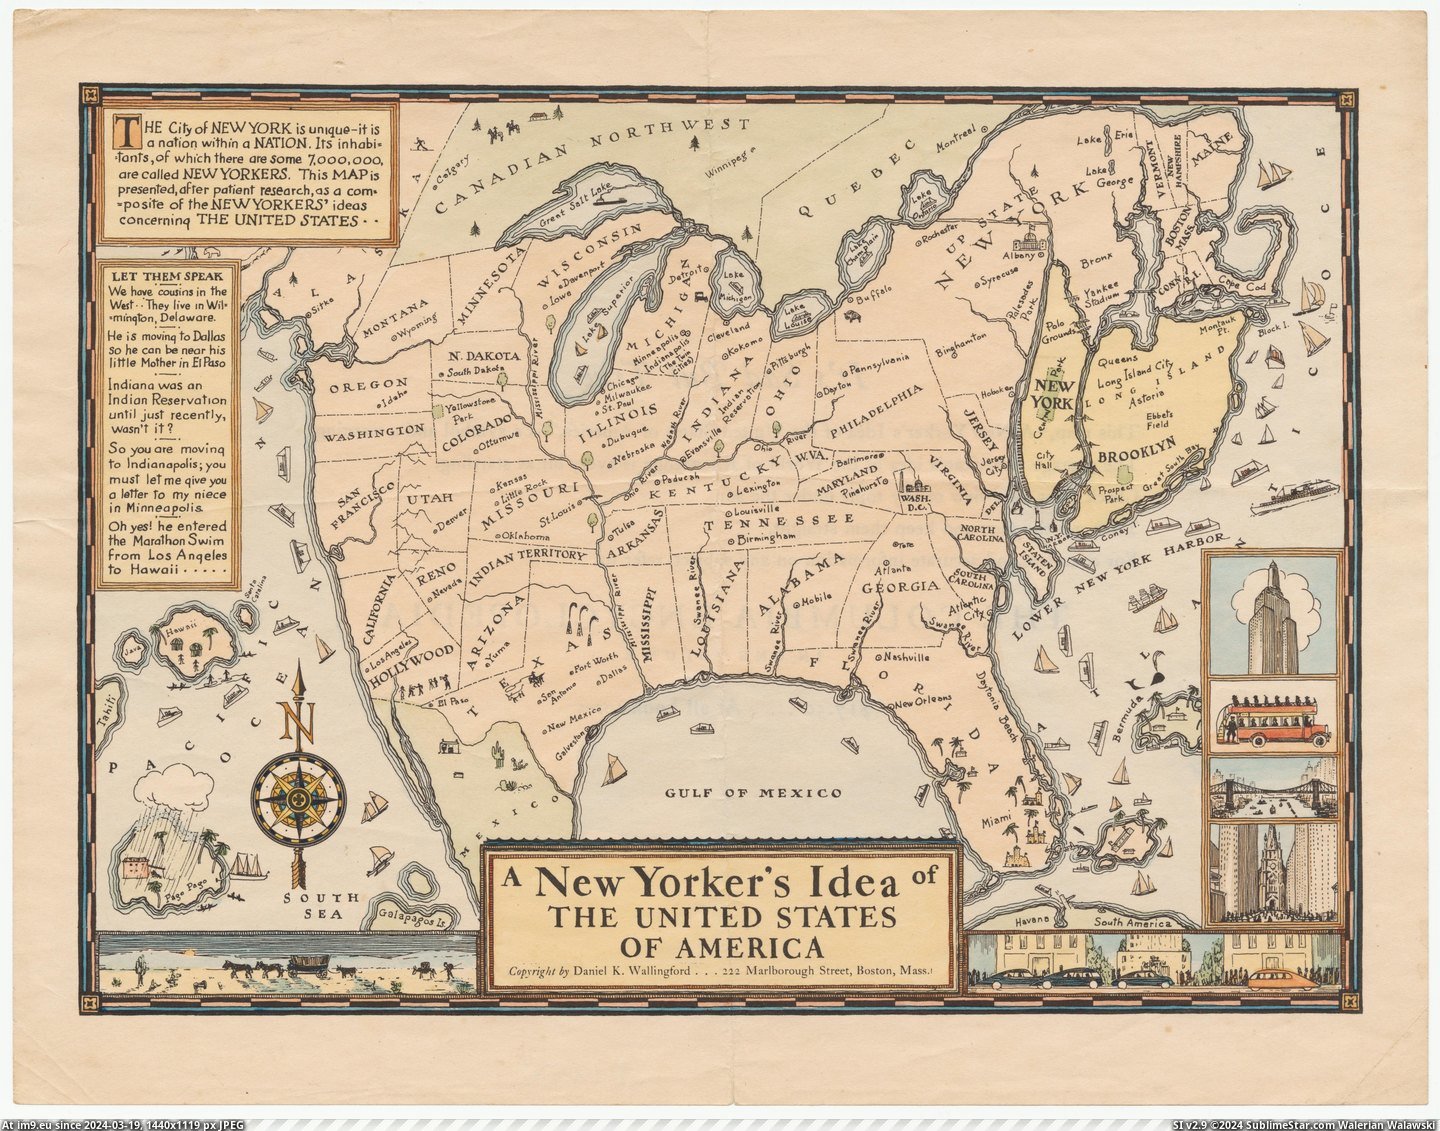 #States #America #Idea #United [Mapporn] A New Yorker's Idea of the United States of America (1936) [6677x5202] Pic. (Image of album My r/MAPS favs))